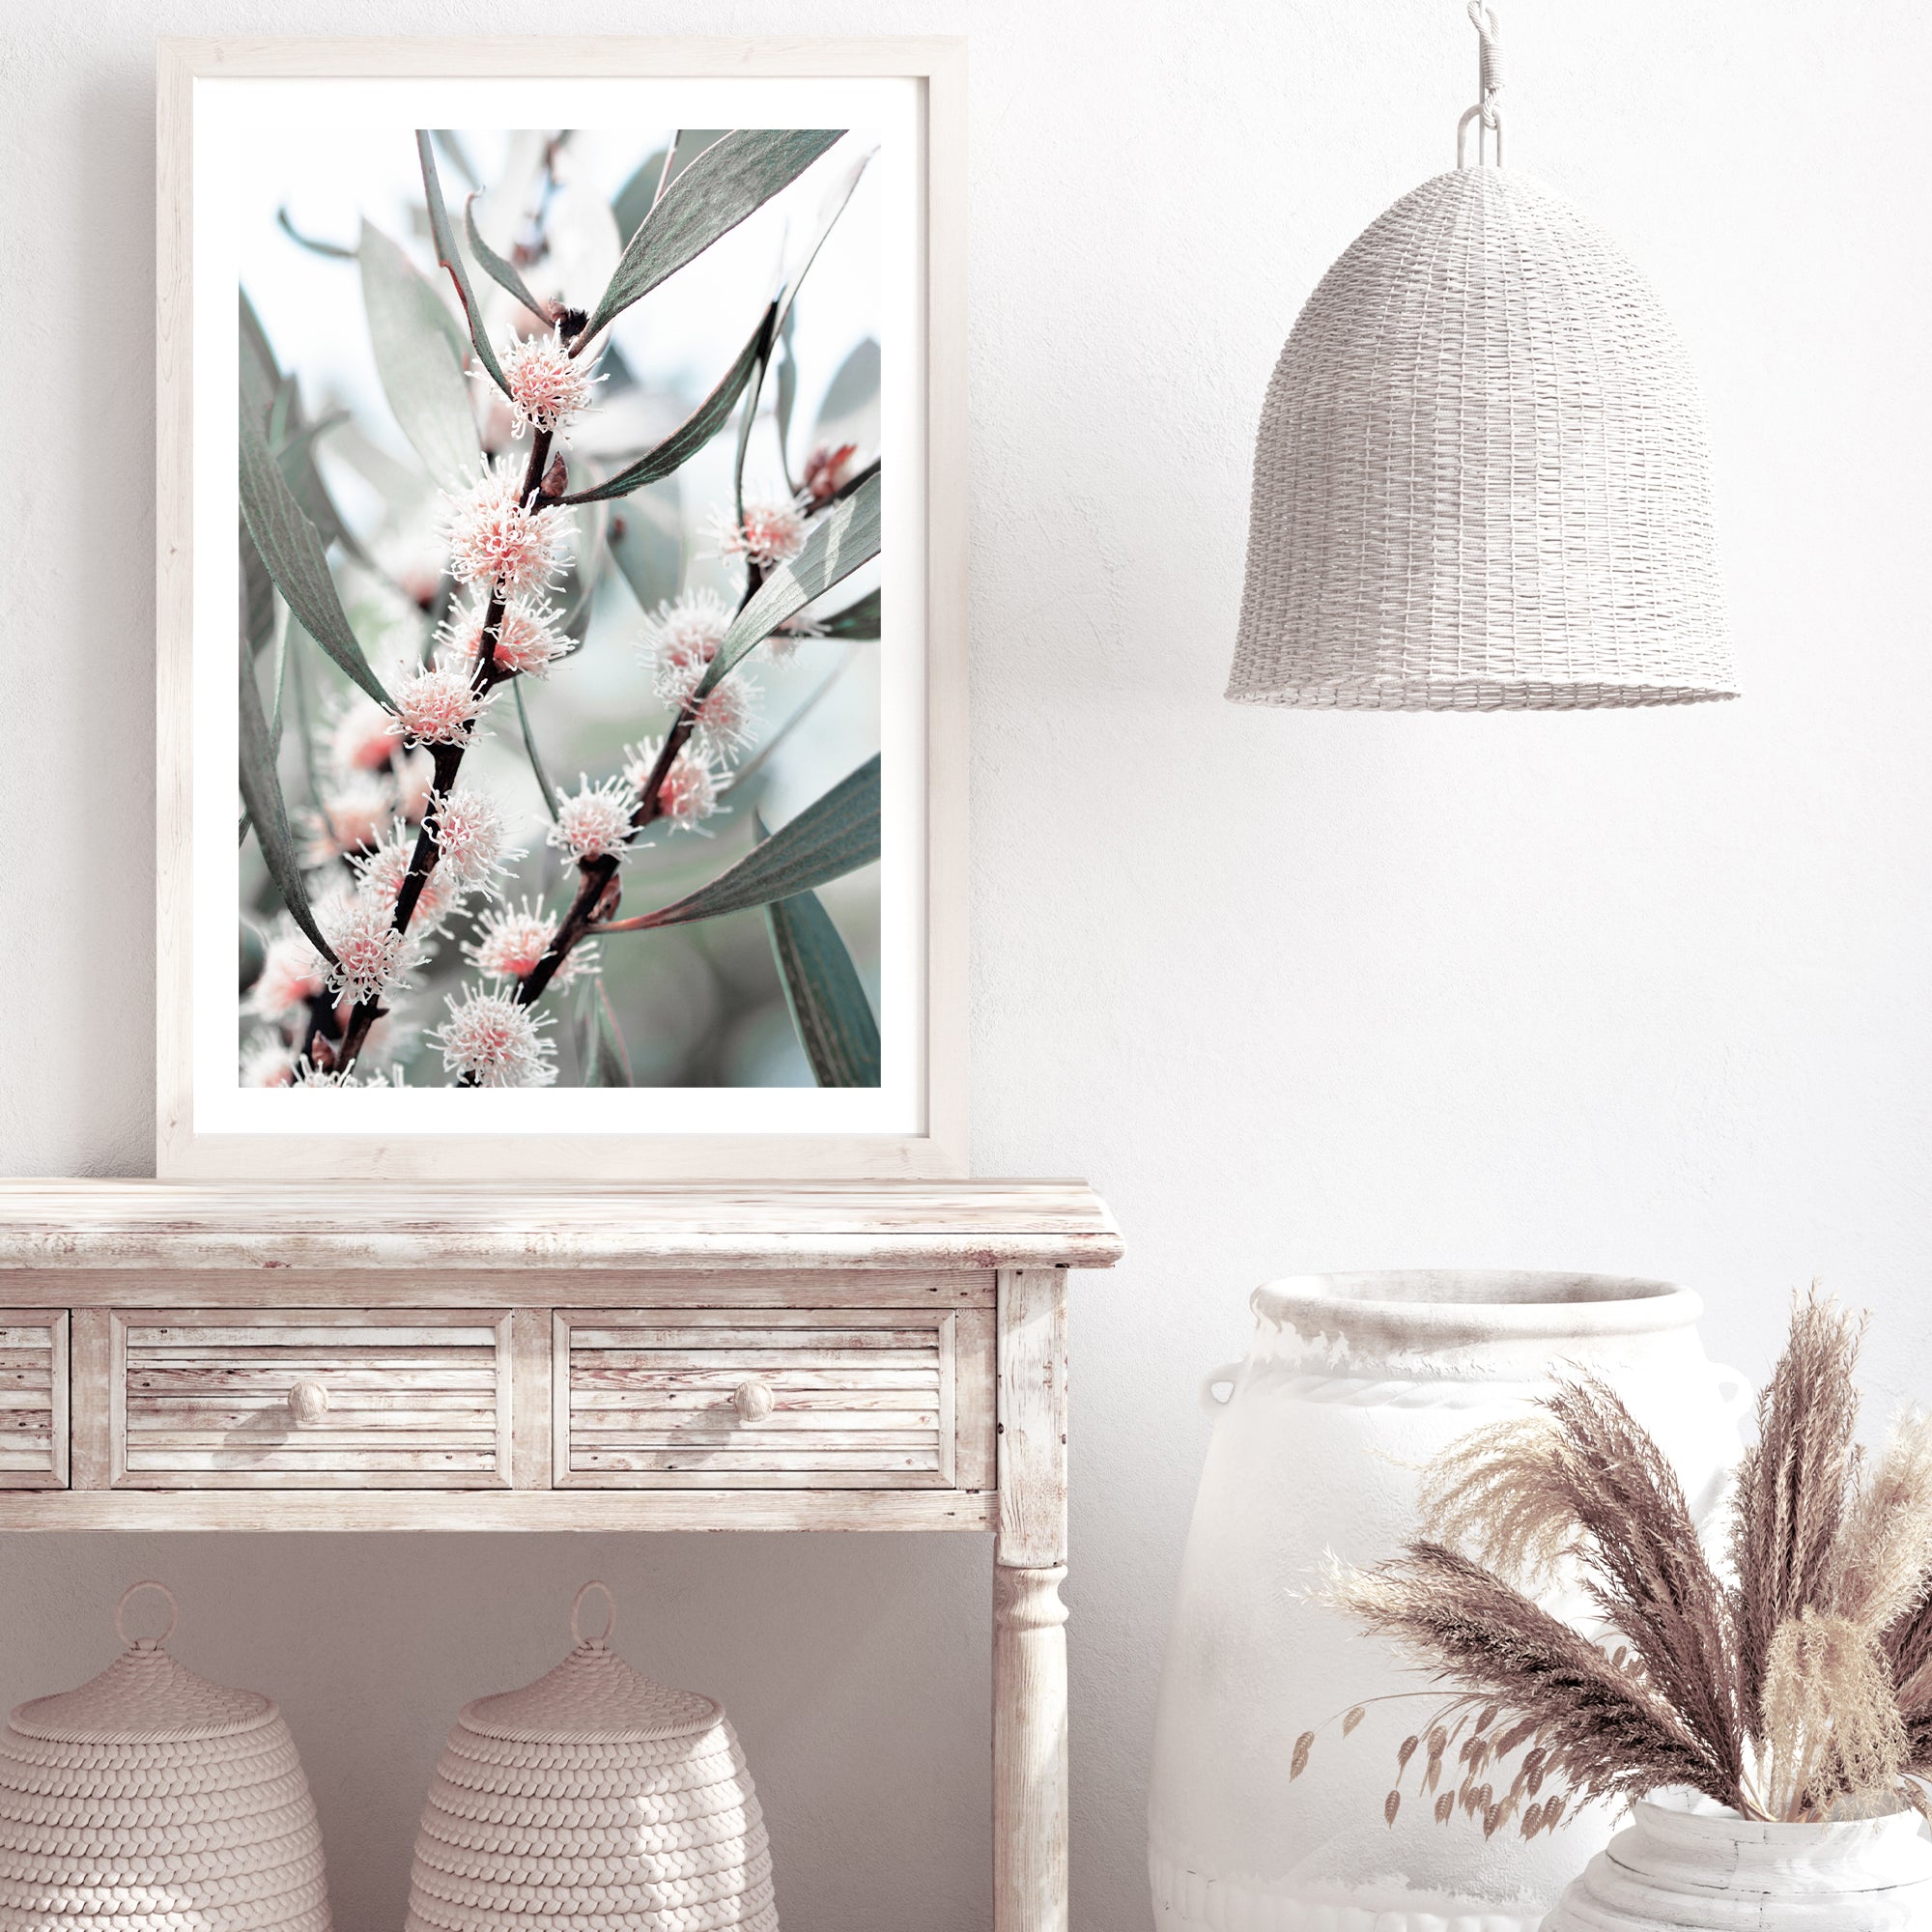 An artwork of eucalytpus pink wild flowers and green leaves with branches in the background on canvas or photo wall art print.  